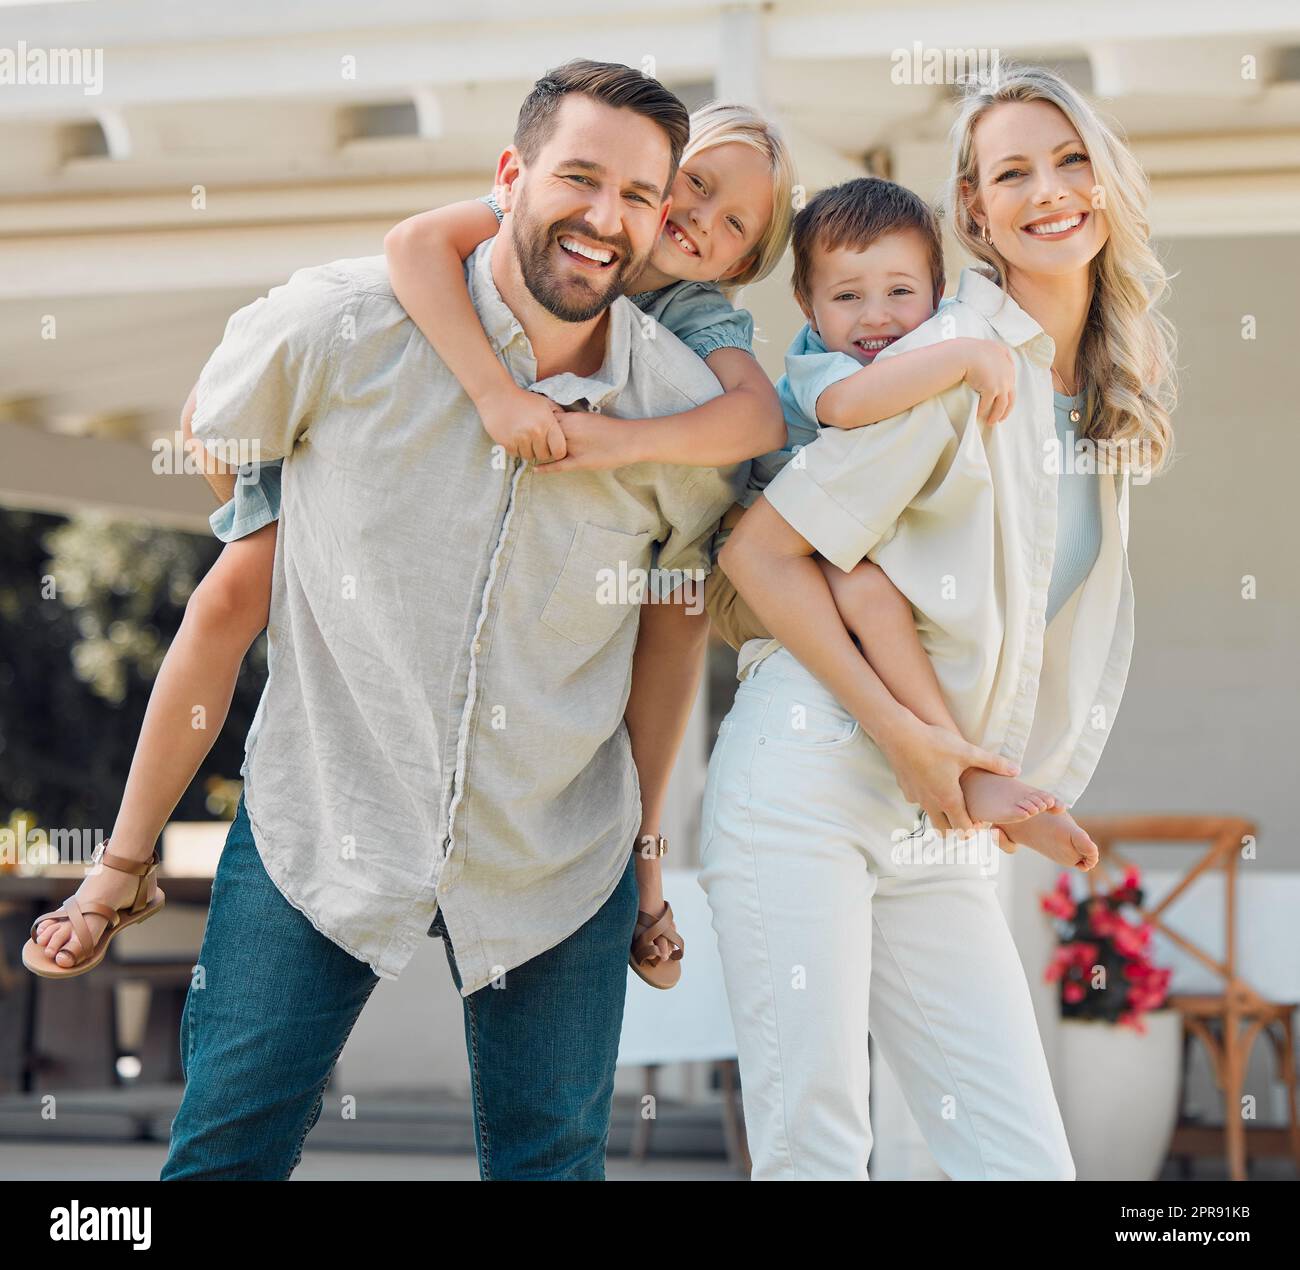 Portrait of happy parents giving their little children piggyback rides outside in a garden. Smiling caucasian couple bonding with their adorable son and daughter in the backyard. Playful kids enjoying Stock Photo